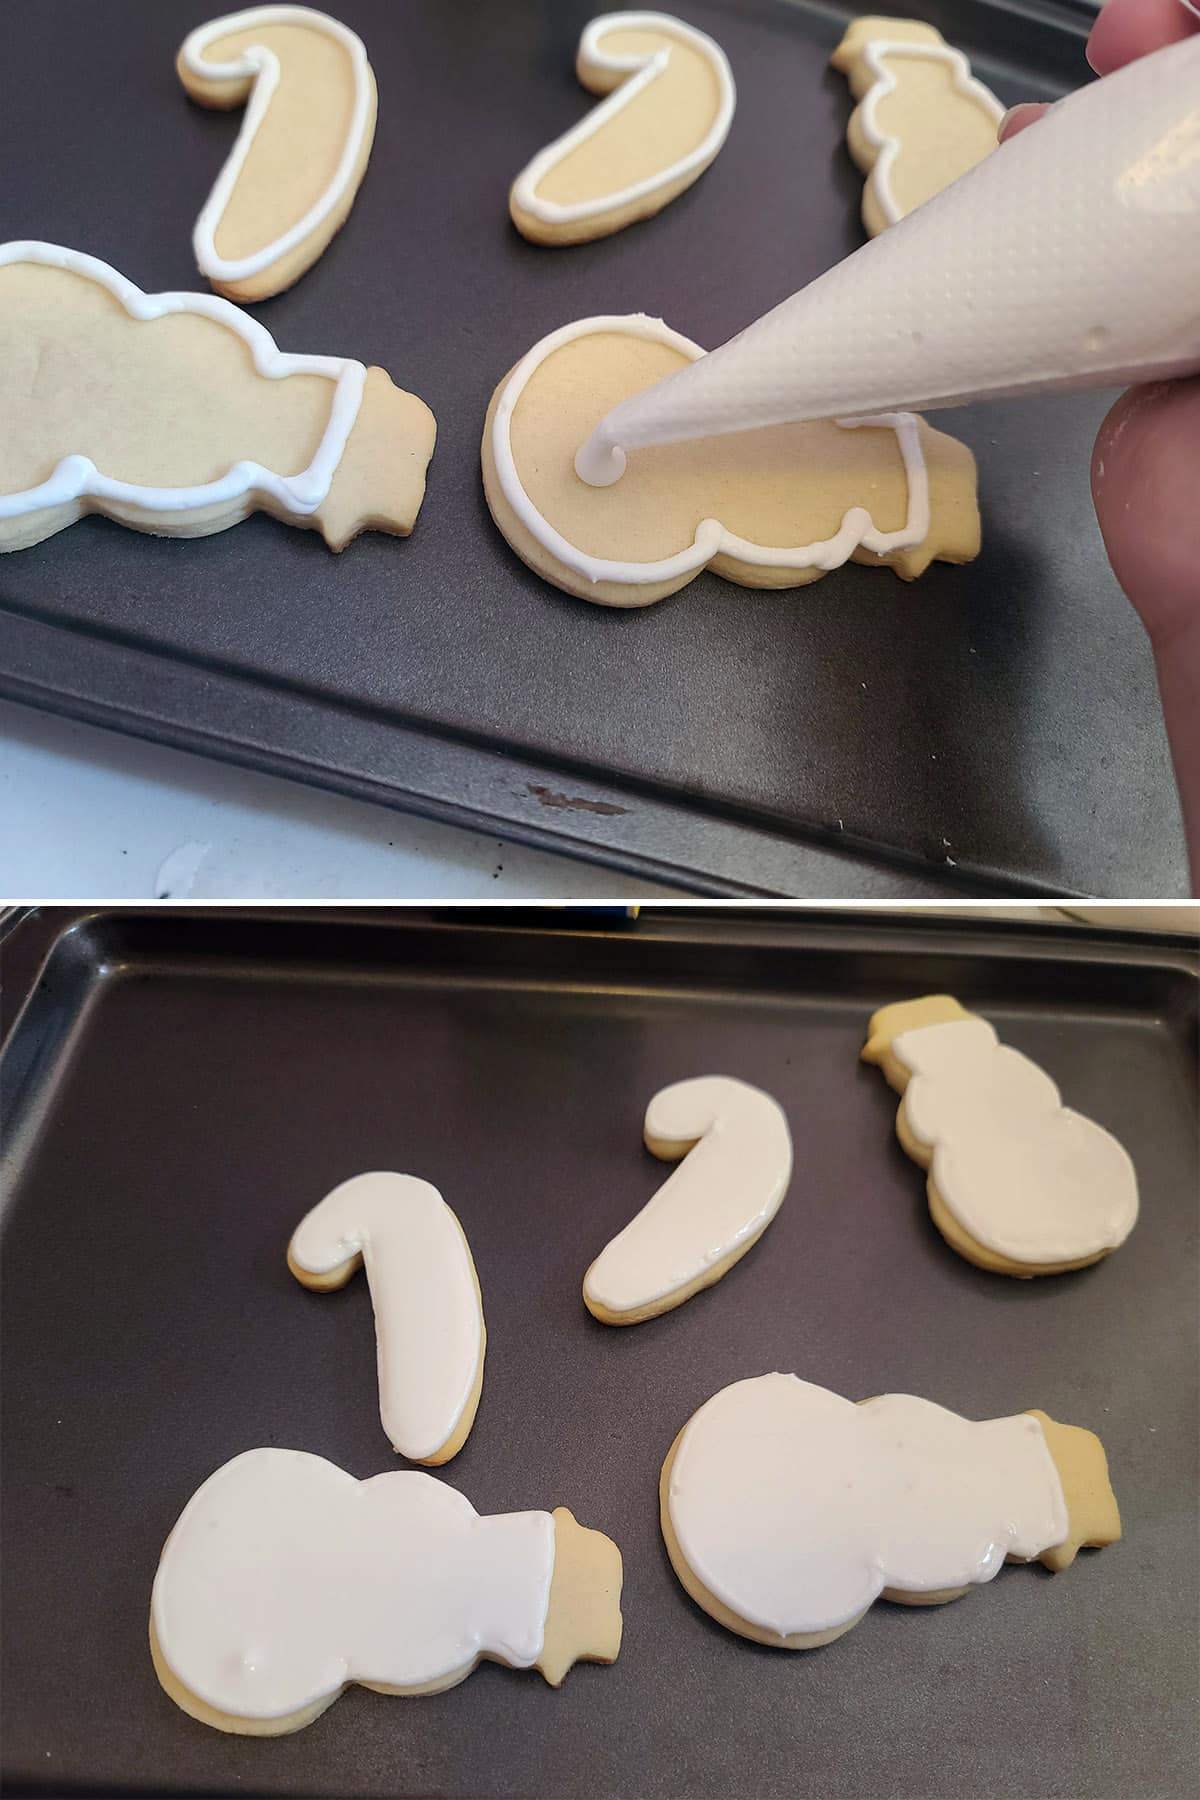 Cookie decorating in progress - outlined cookies being filled in with white royal icing.